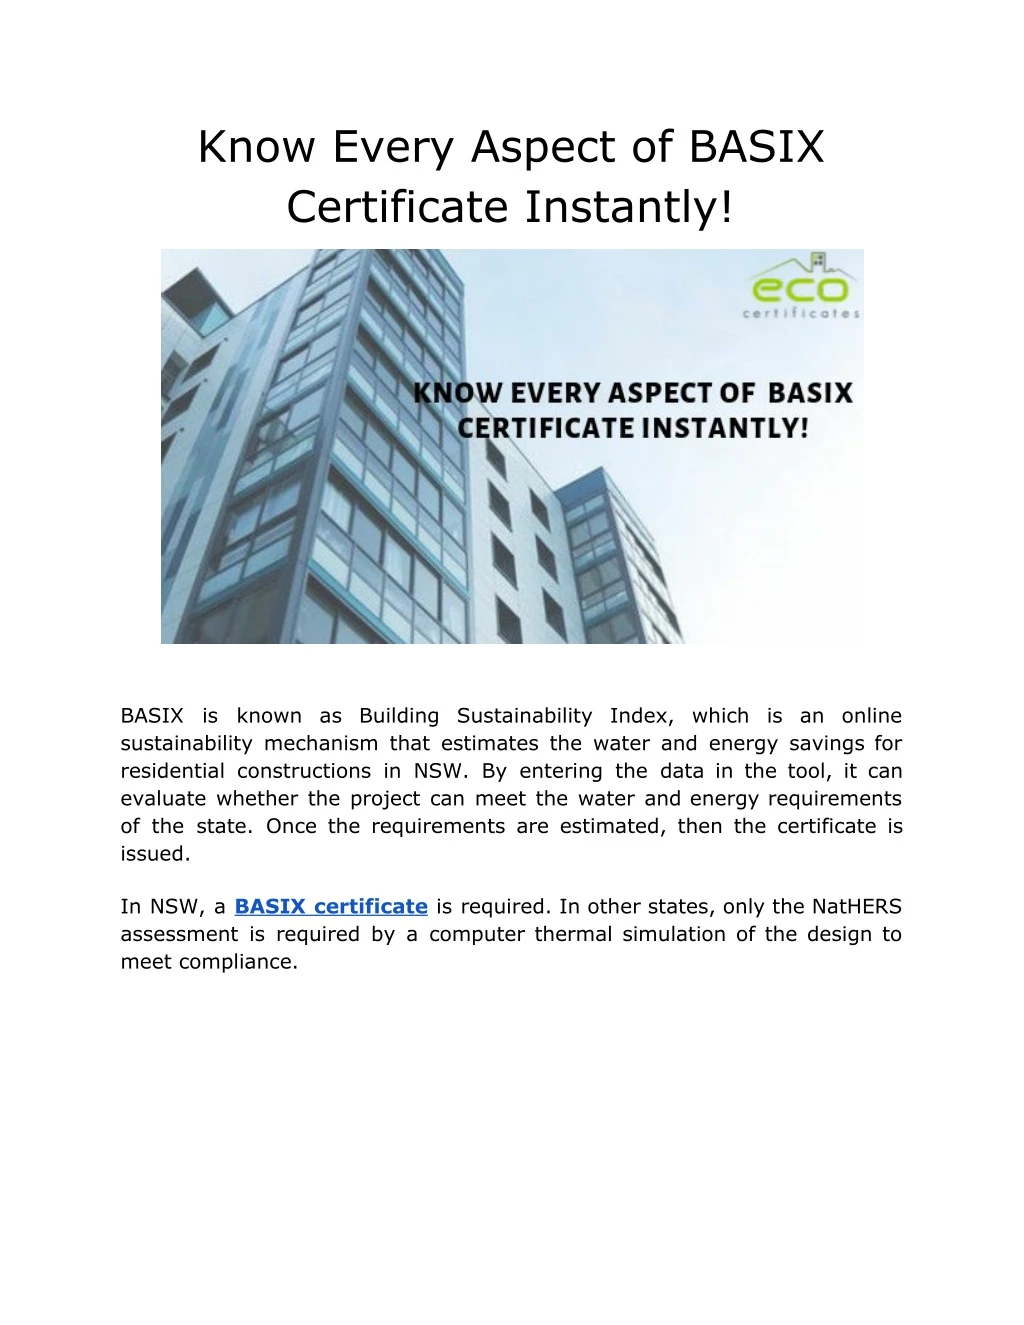 know every aspect of basix certificate instantly